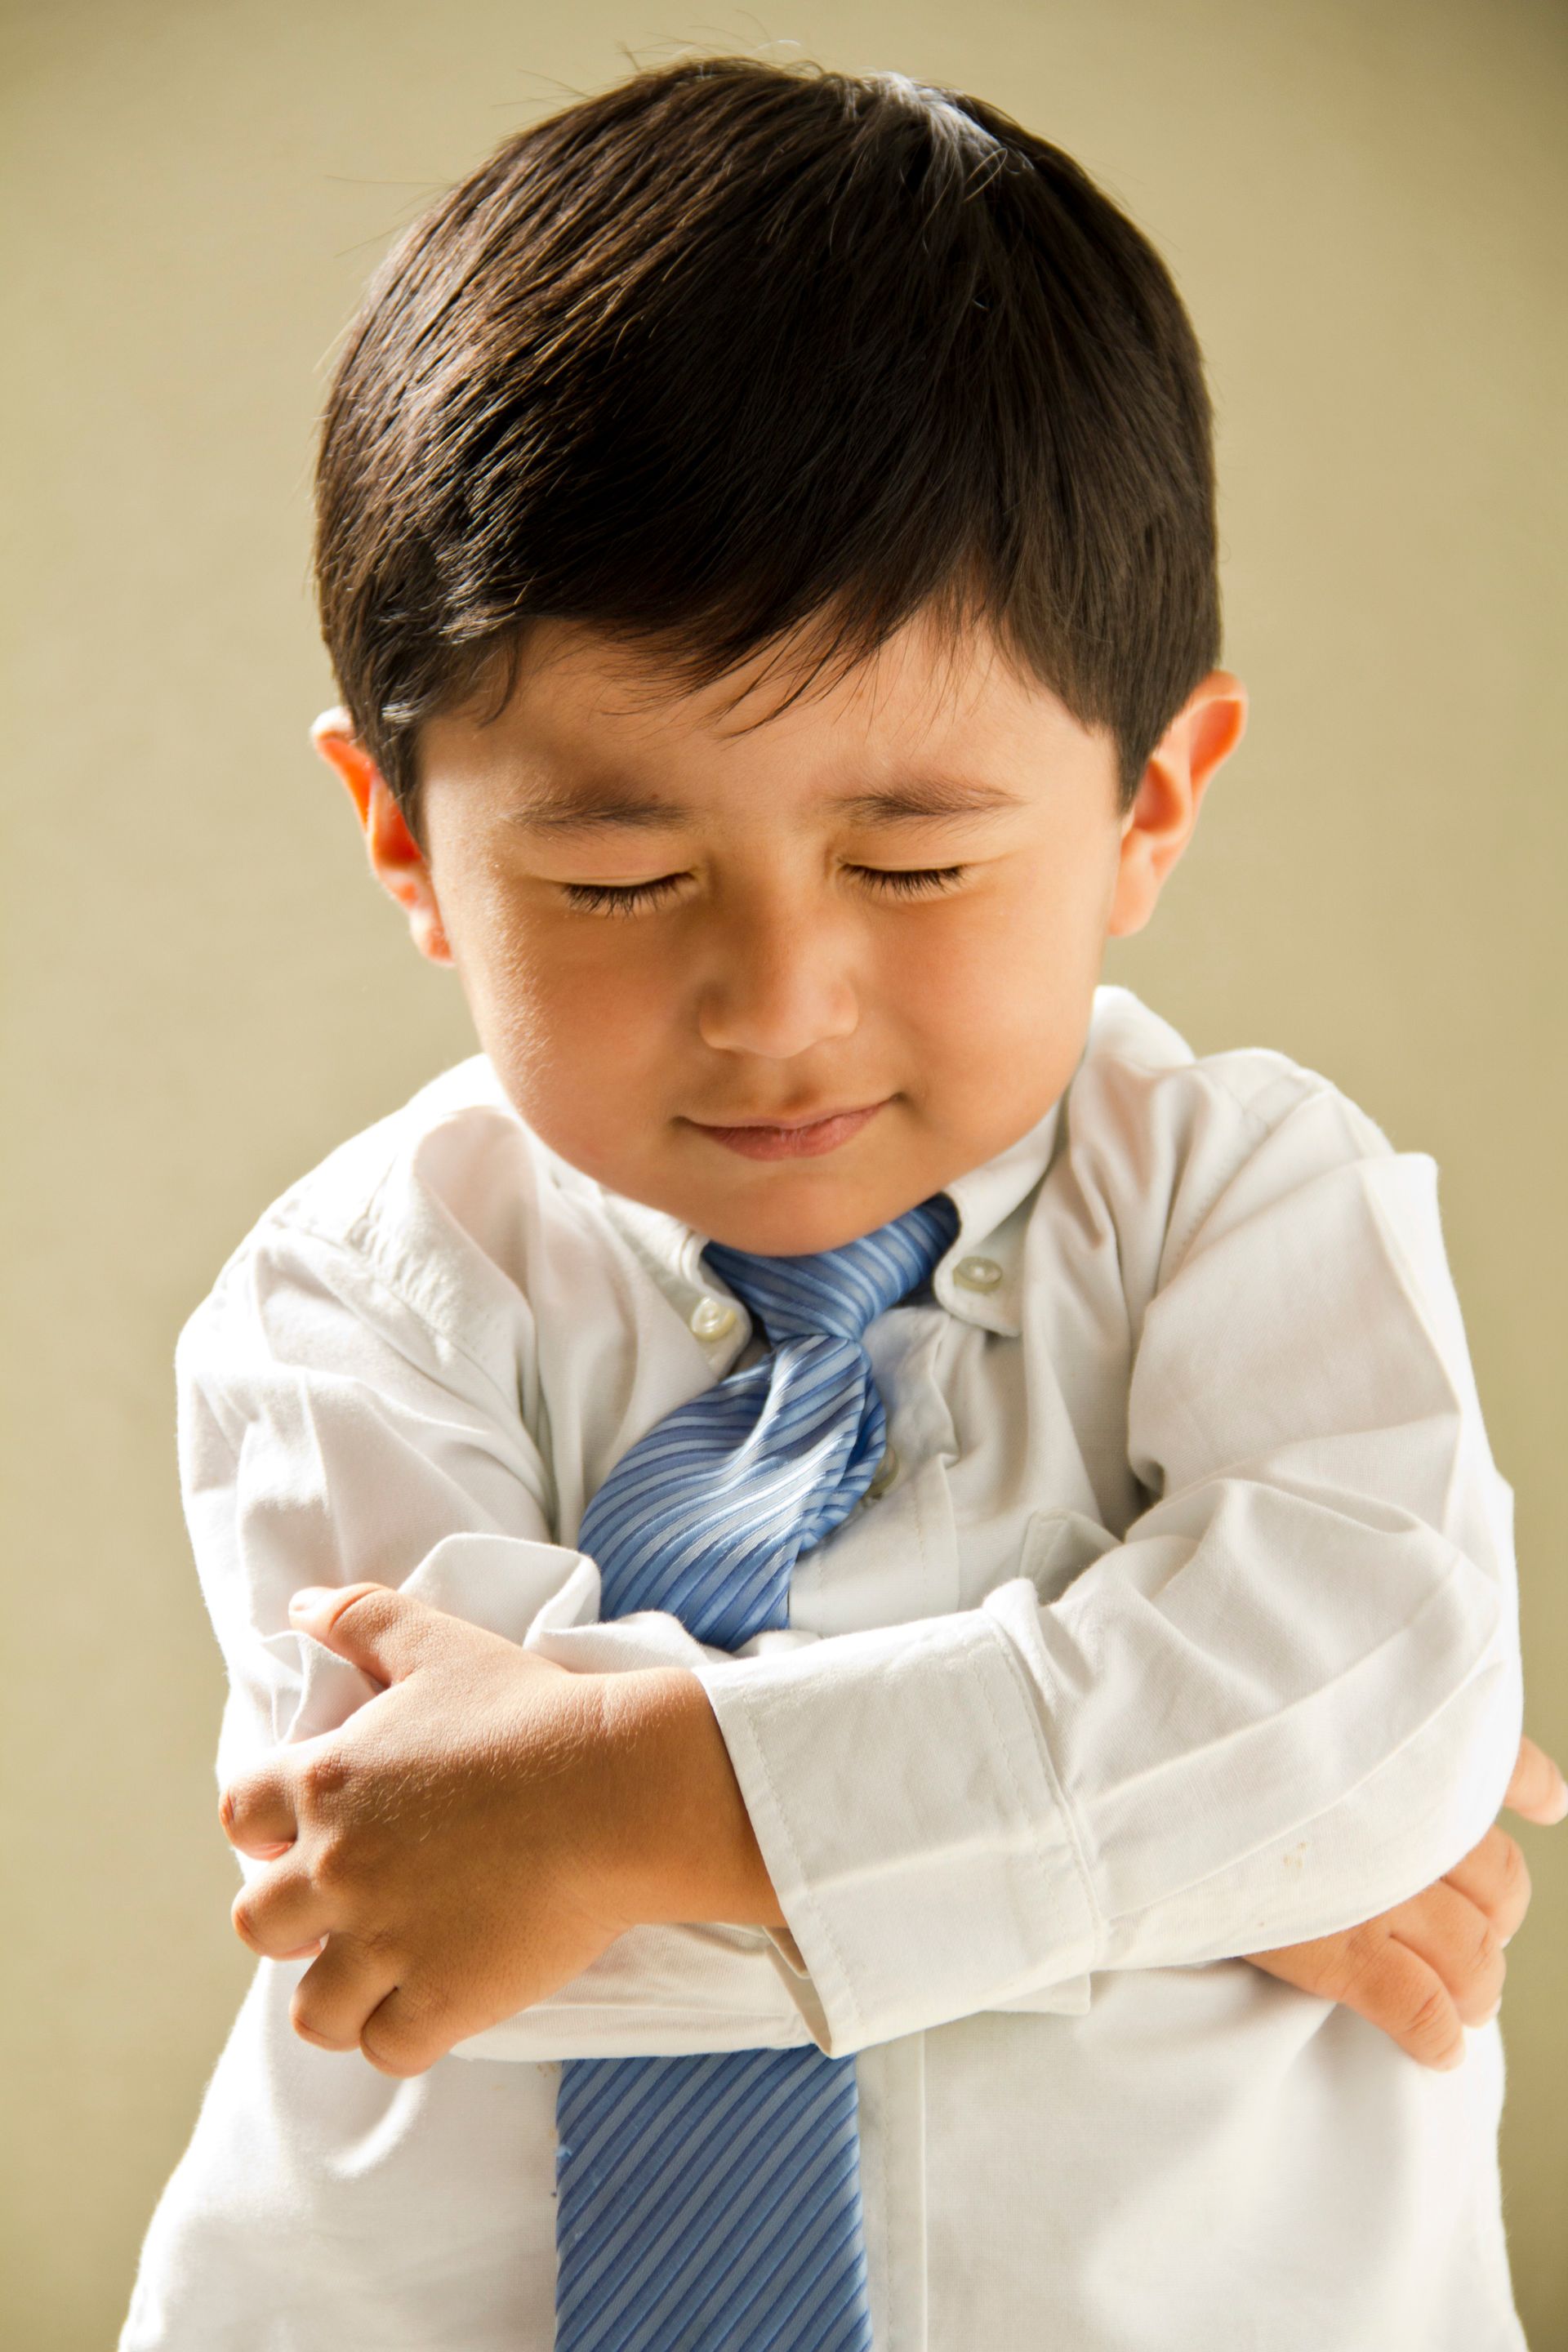 A young boy folding his arms in prayer.